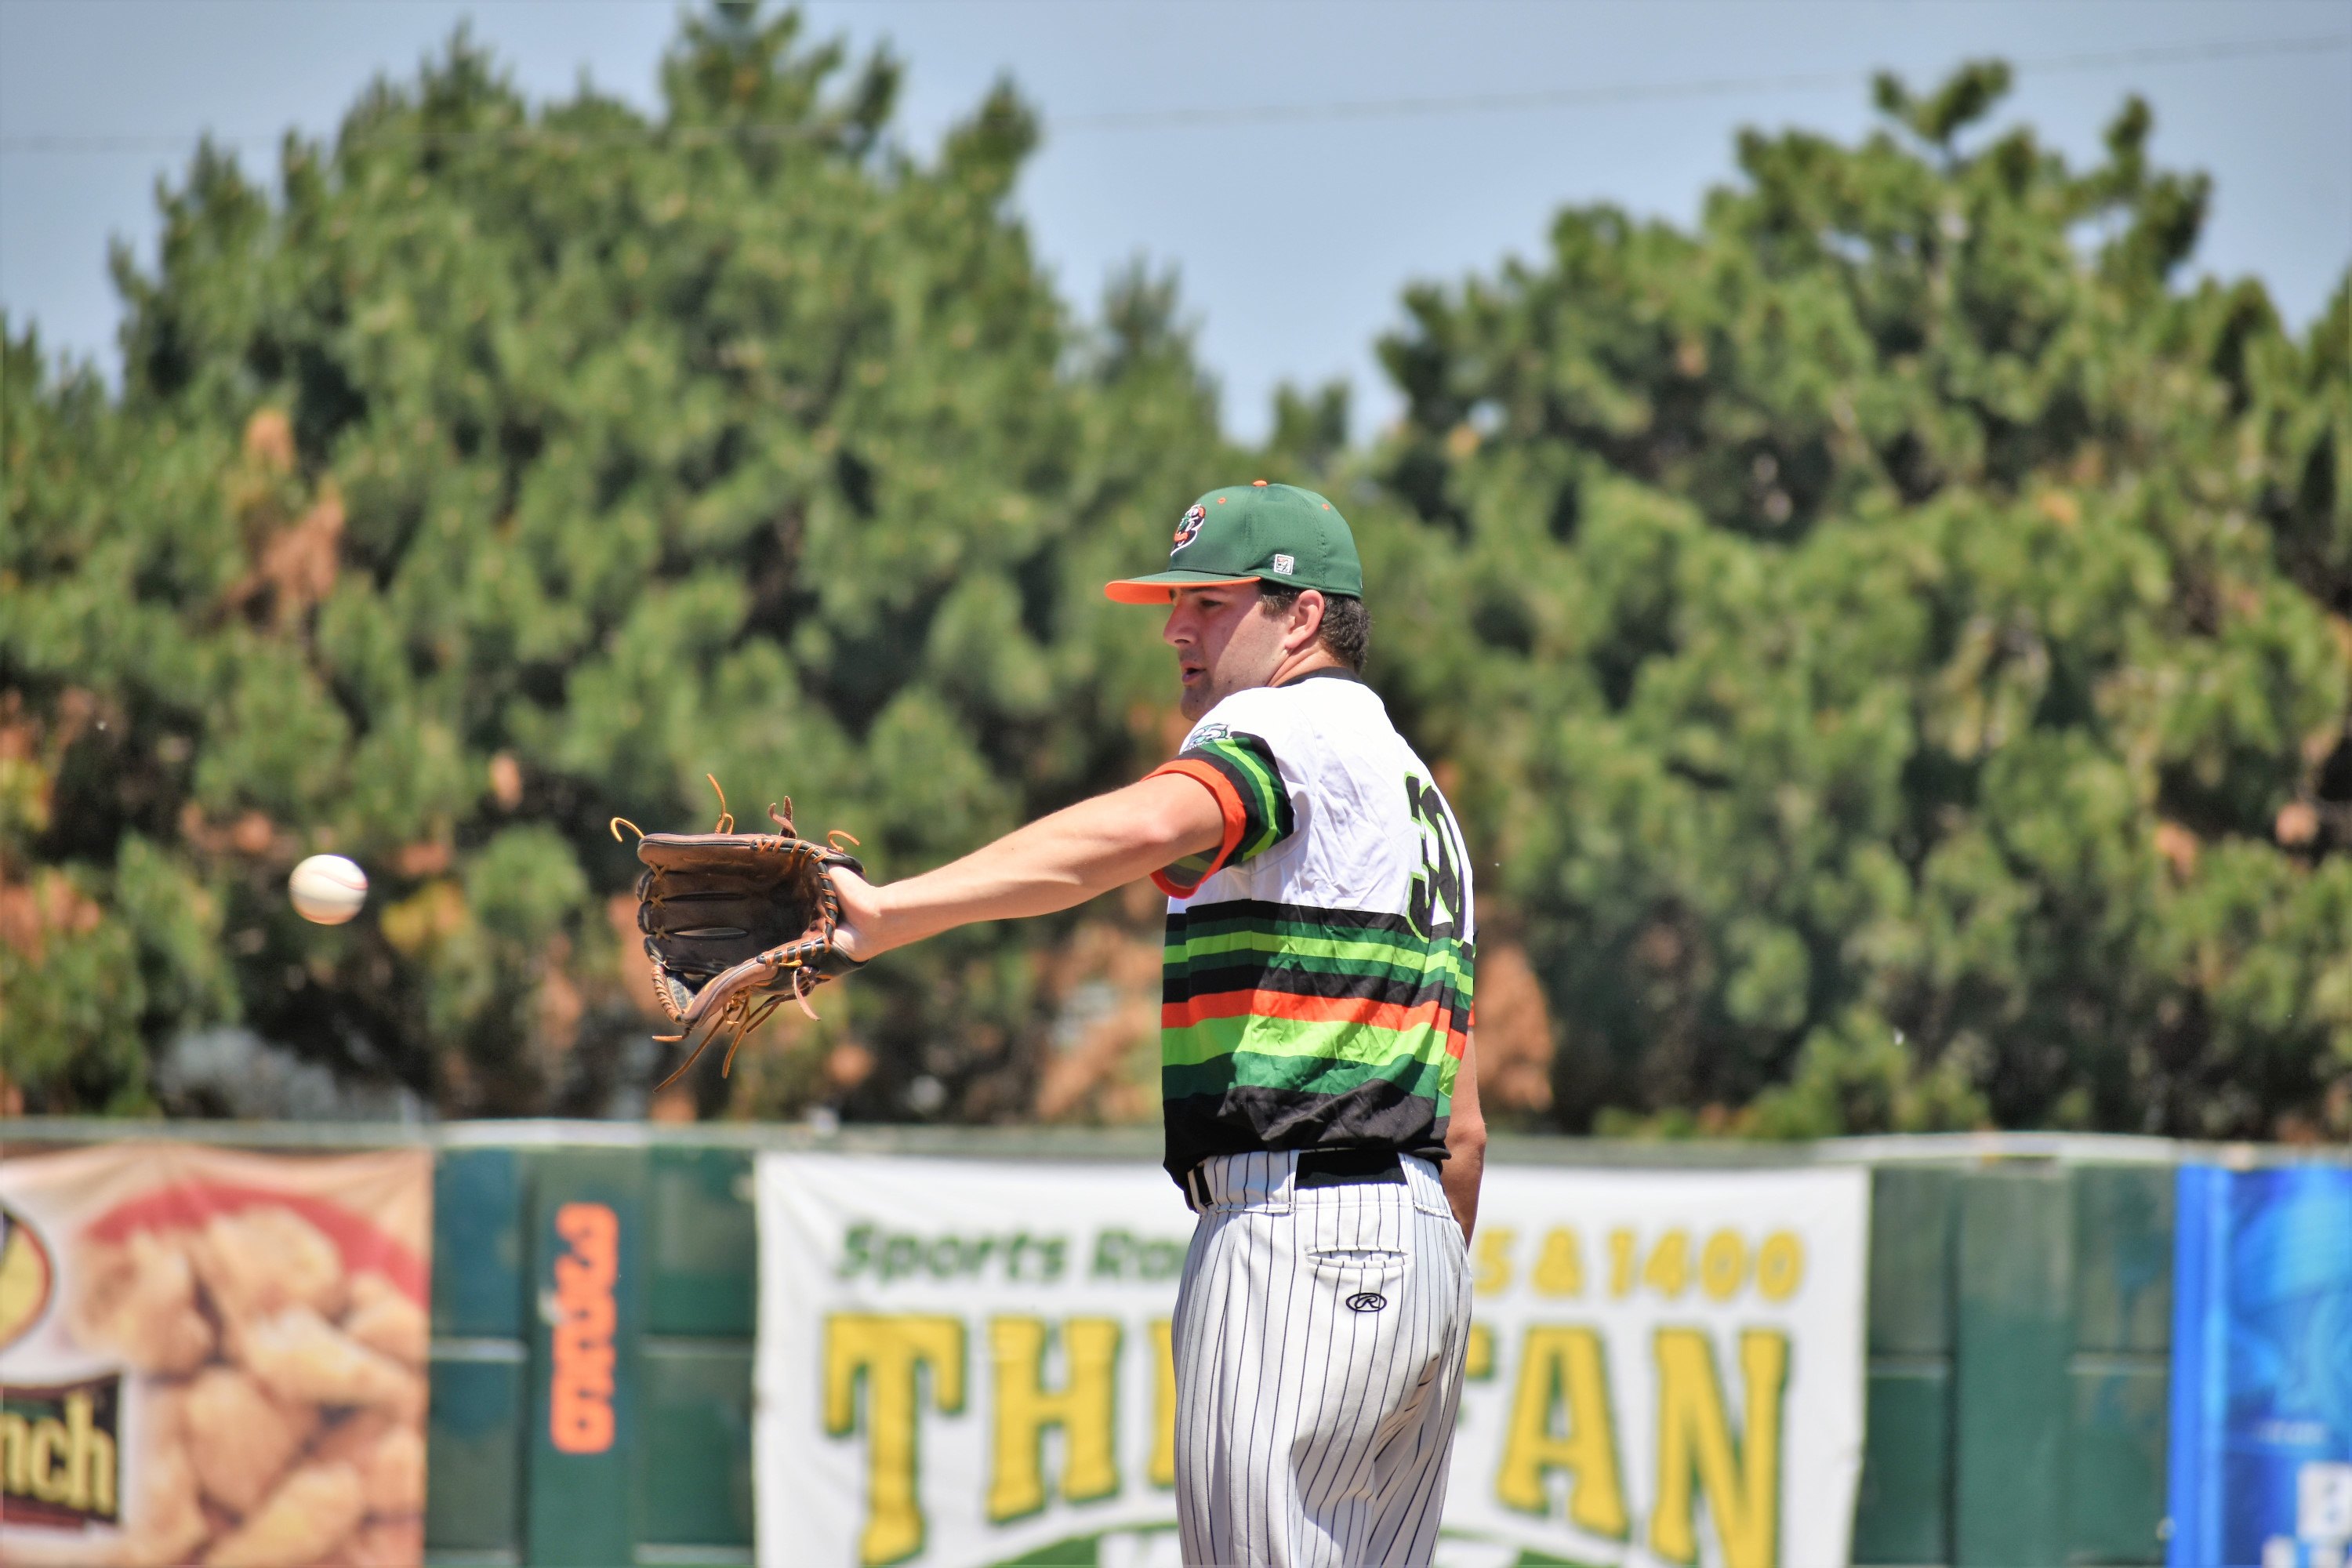 One bad inning costs Bullfrogs